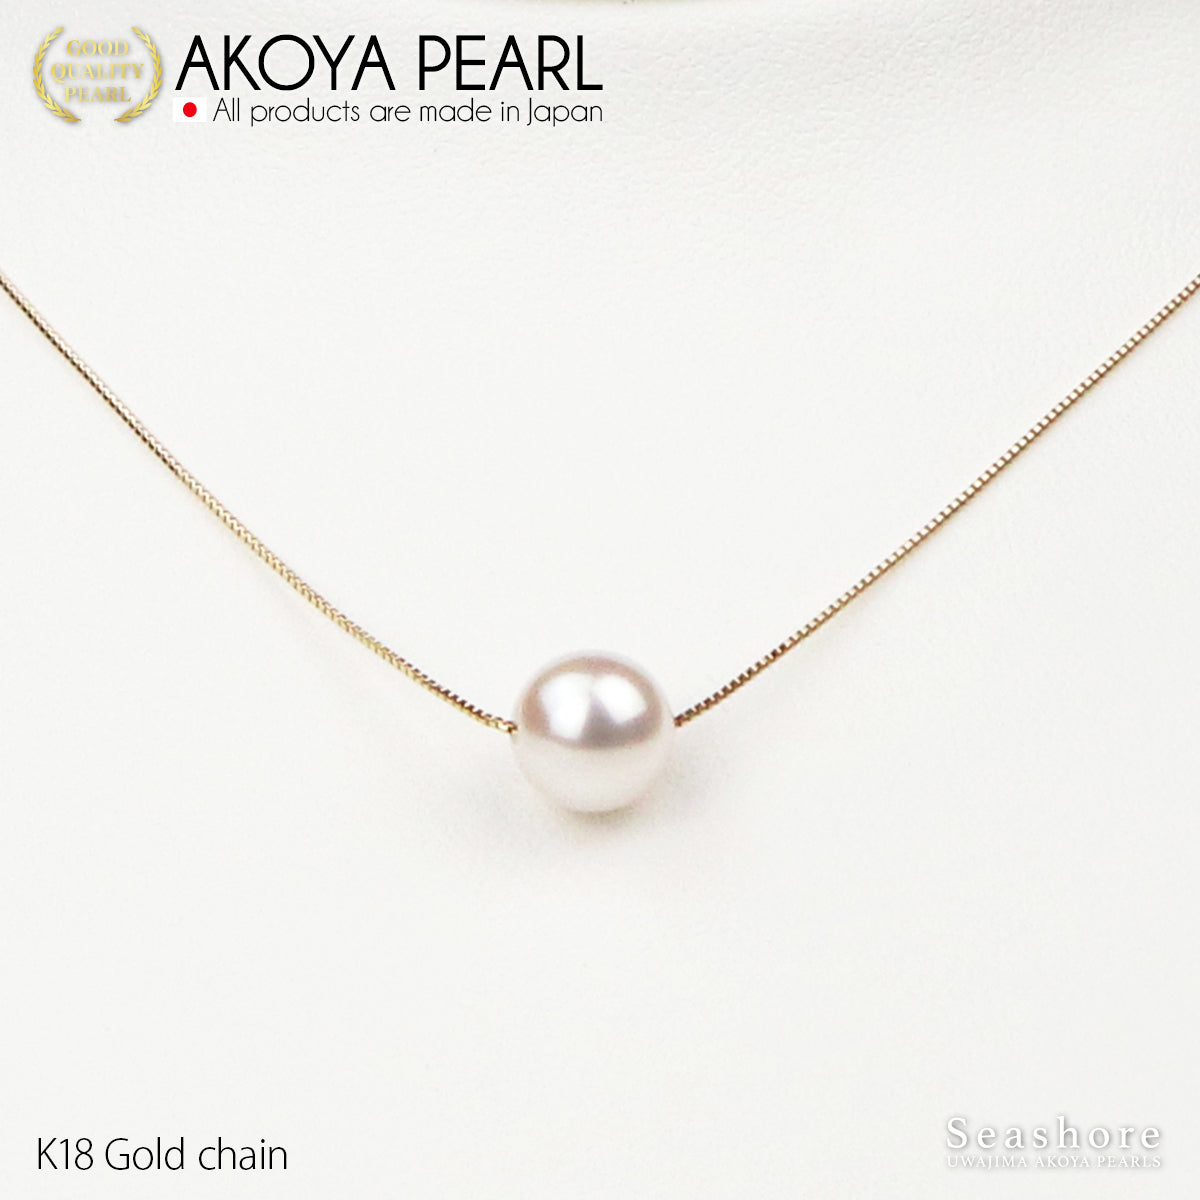 Flower beads single pearl through necklace 8.0-9.0mm [Chain available in 3 colors] K18G / K18PG / K18WG 0.6φ Venetian chain Akoya pearl Storage case included